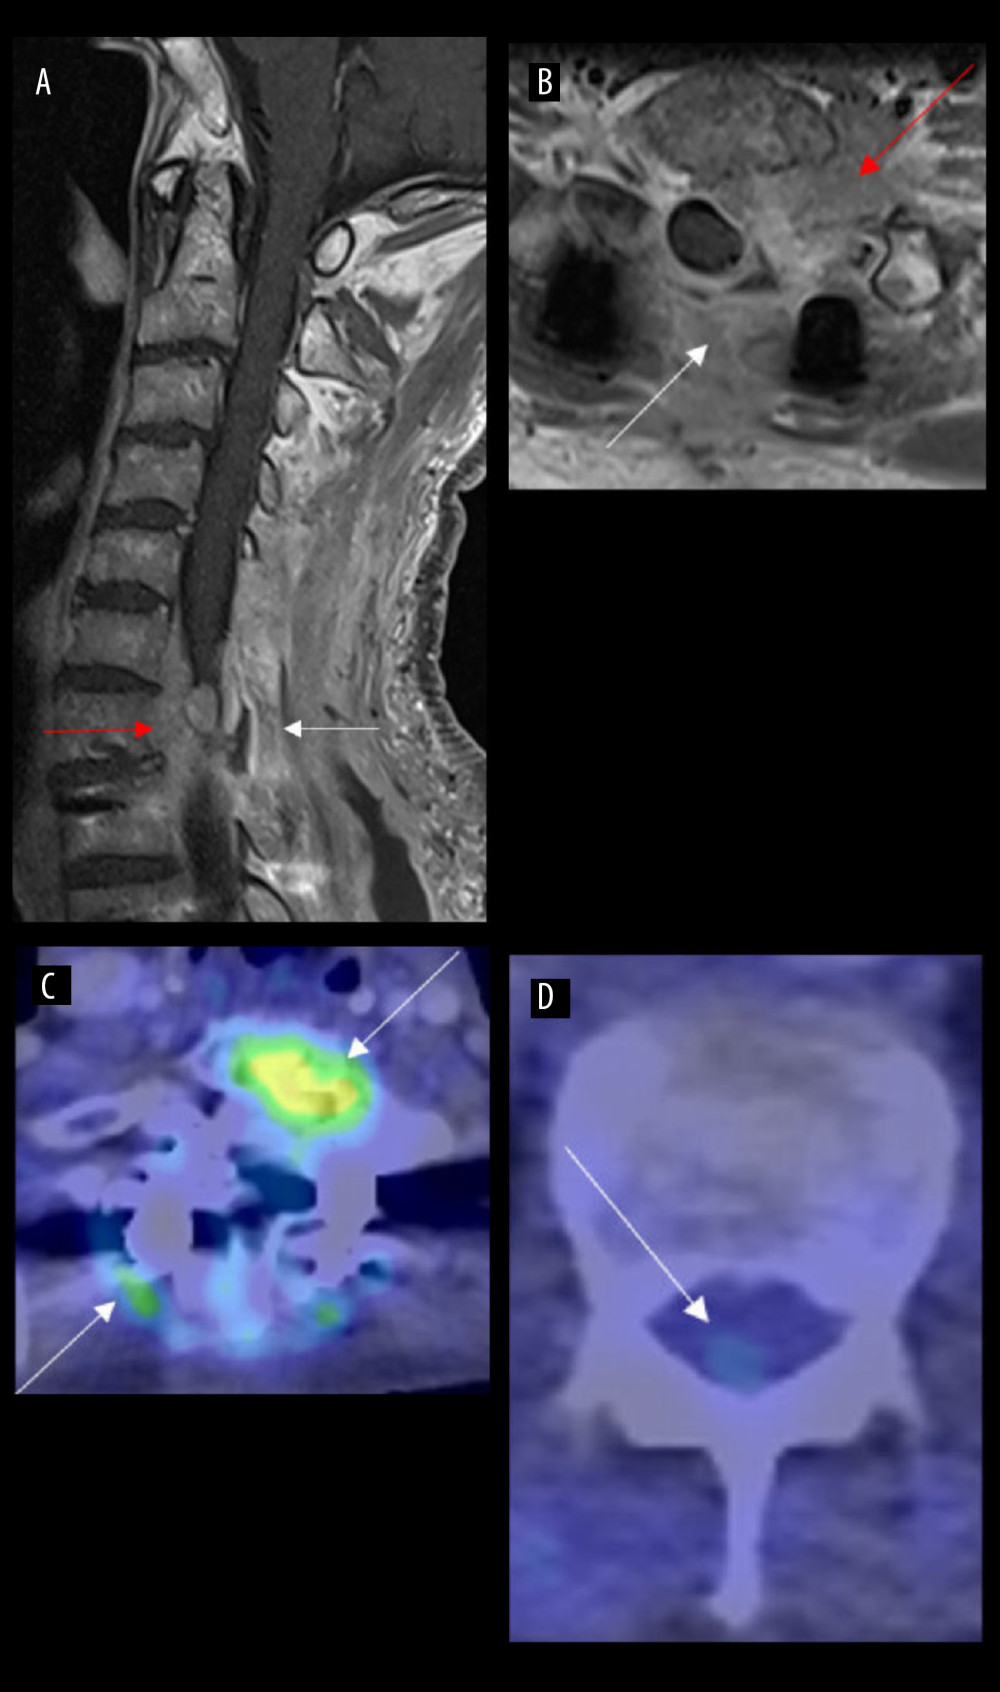 Postoperative MRI and PET-CT scans of an 82-year-old man following tumor debulking. (A) Sagittal and (B) axial T1-weighted (W) MR images performed following posterior laminectomy and tumor debulking show residual tumor predominantly in the anterior epidural space at C7 level (red arrows). Note the post-laminectomy changes on the sagittal T1W post-contrast image (white arrows). (C) Axial positron emission tomographic-computed tomography (PET-CT) image at C7 level shows focal increased 18F-FDG uptake at the anteromedial aspect of the C7 vertebral region, with maximum standardized uptake values, SUVmax=25, indicating residual tumor (red arrow, C) while the mild focal uptake at the right paraspinal soft tissue (SUVmax=8) represents a post-treatment effect (white arrow, C). (D) Axial PET-CT image at L1 level shows a faint focal uptake in the posterior aspect of the conus medullaris (SUVmax=3.5), which was indeterminate at the time of scanning, but subsequent follow-up showed it to be a drop metastasis.